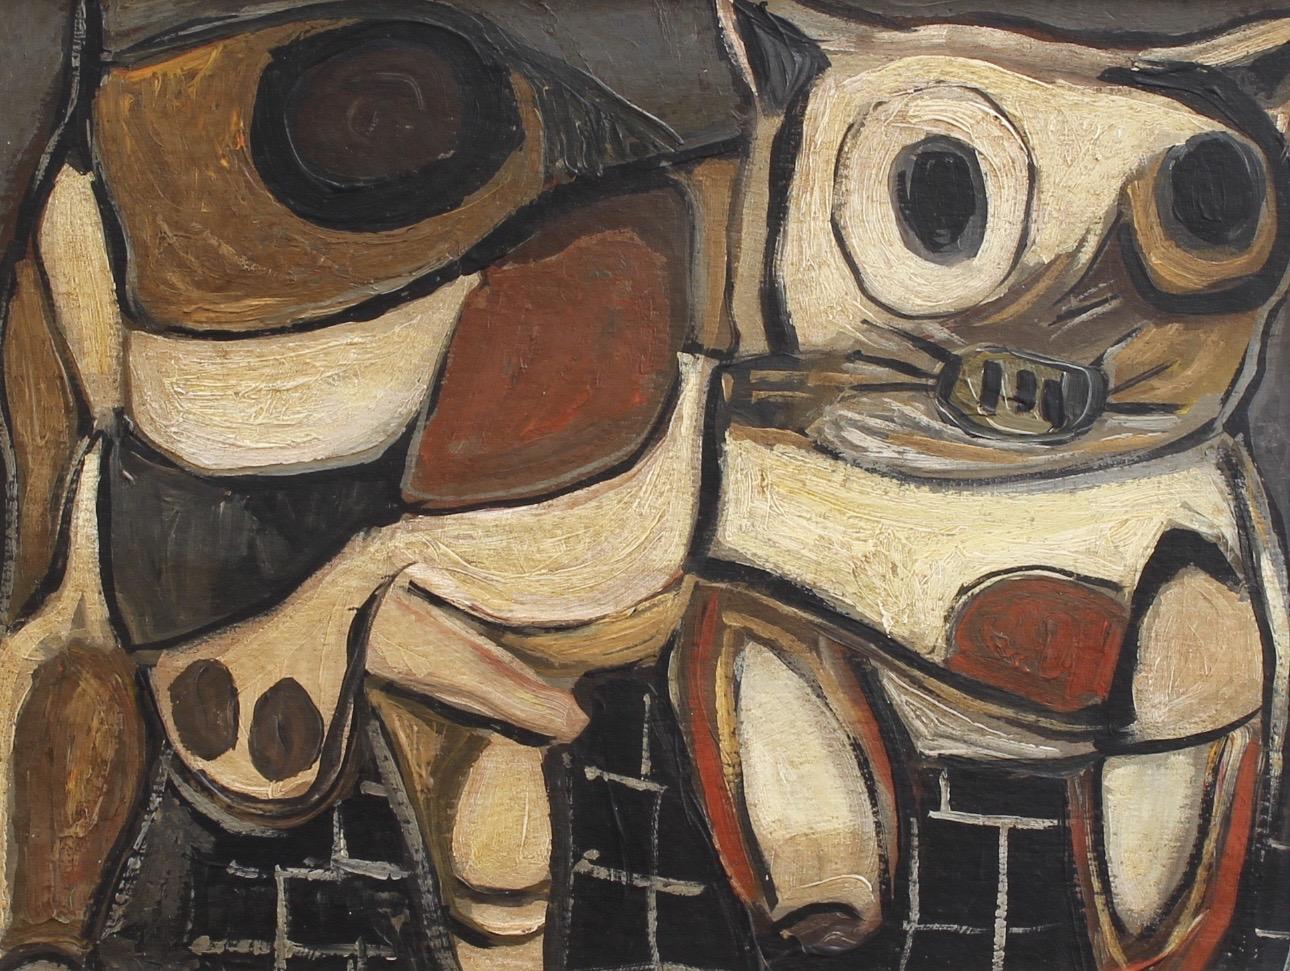 Unknown Abstract Painting - 'Portrait of a Tomcat', Mid-Century Cubist Animal Portrait Oil Painting, Berlin